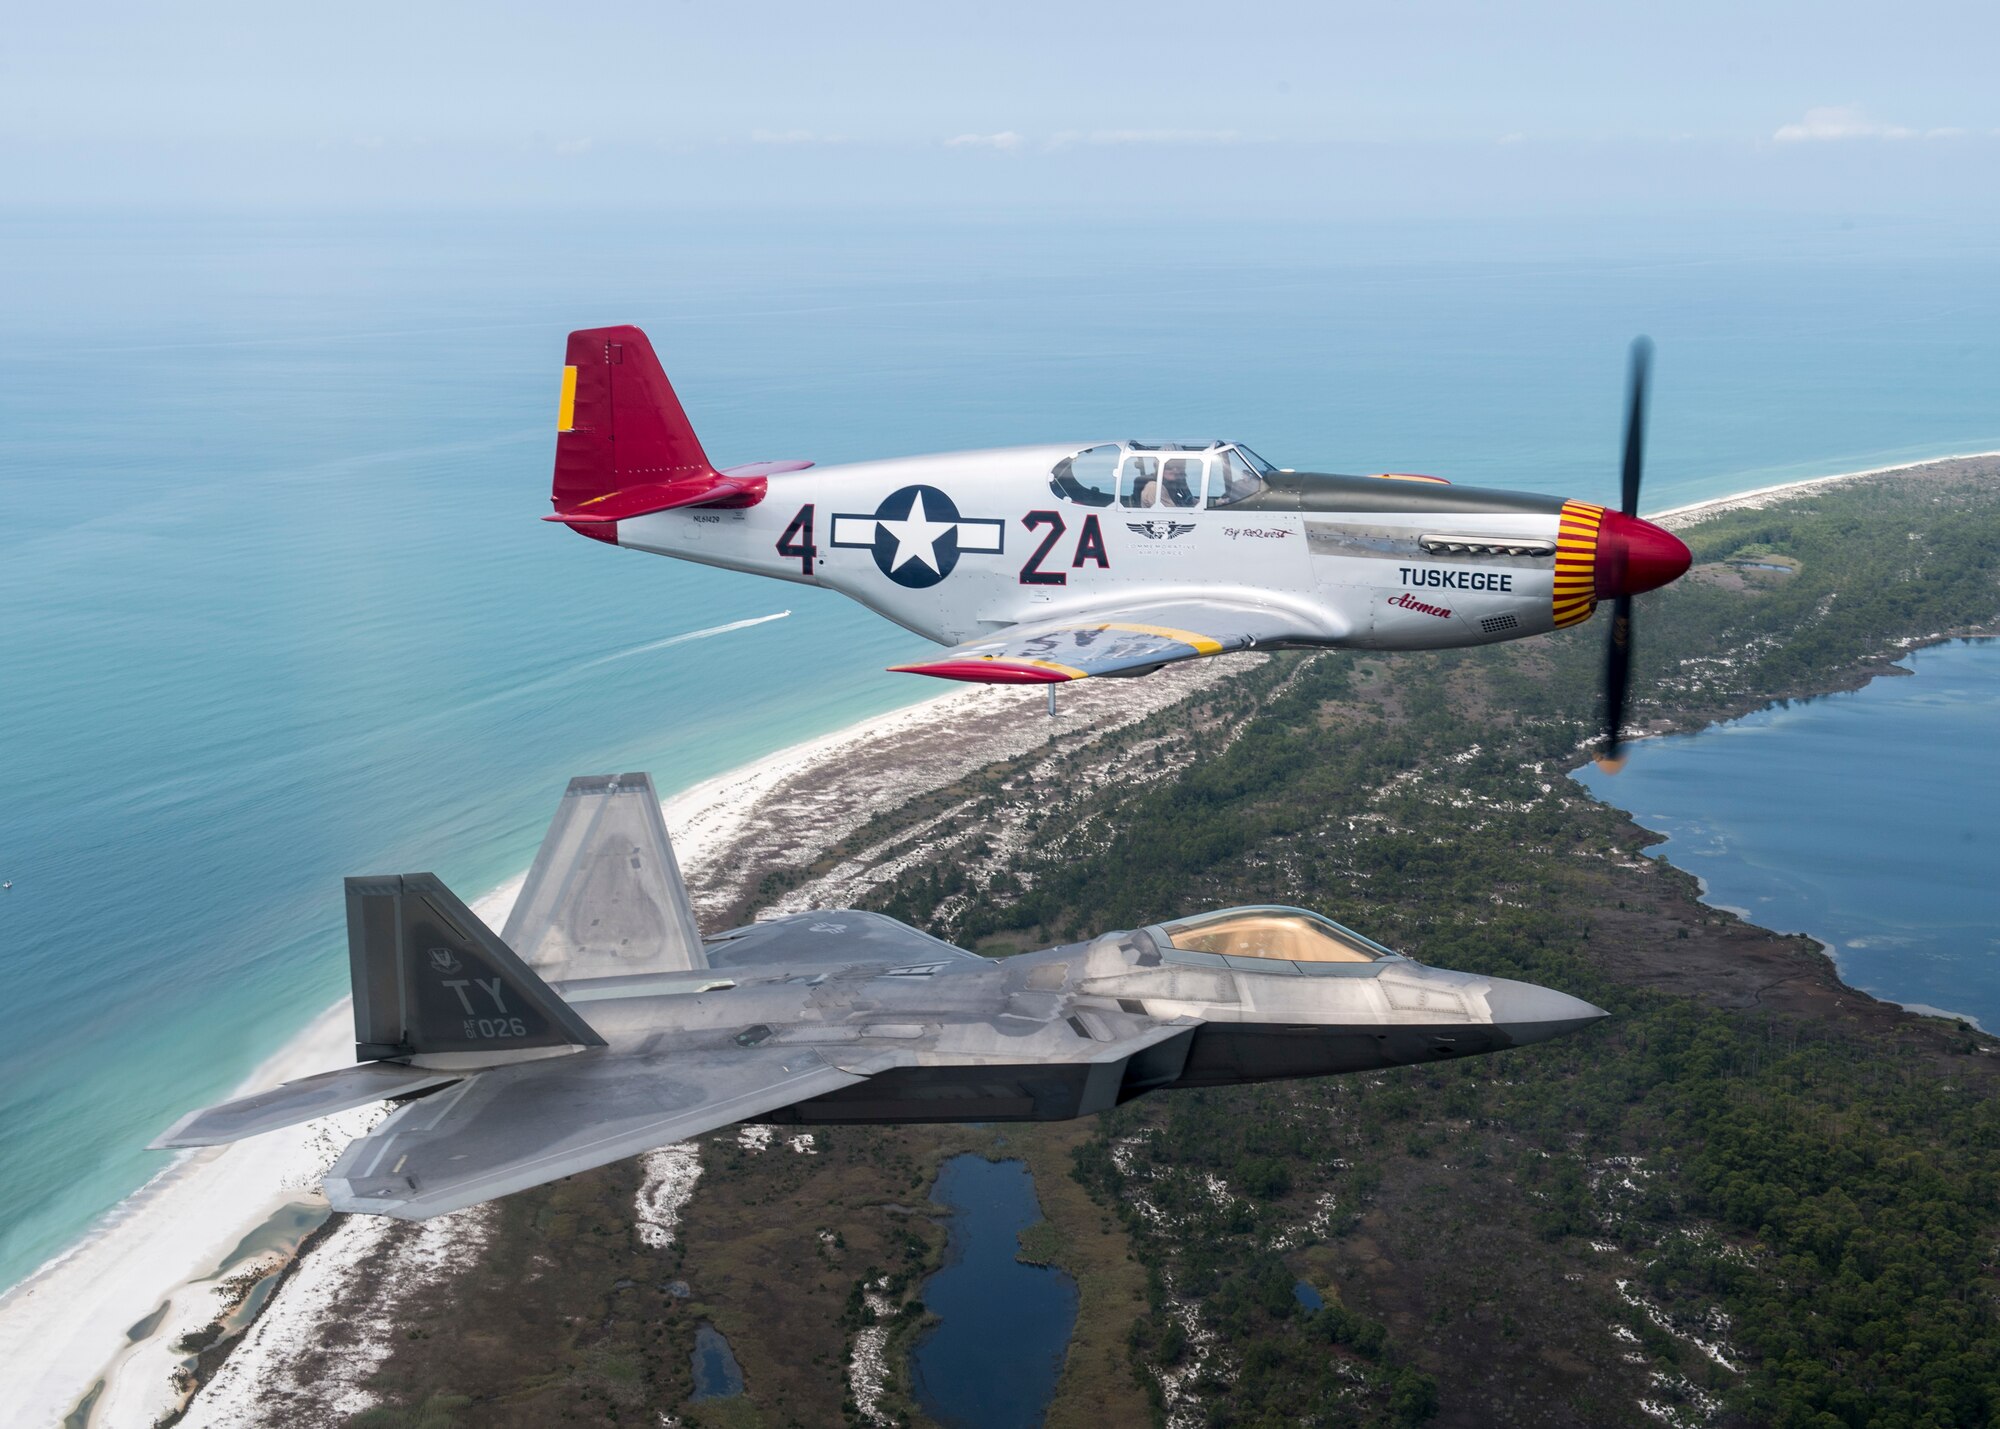 A U.S. Air Force F-22 Raptor aircraft assigned to Tyndall Air Force Base flies in formation with a World War II-era P-51 Mustang, April 22, 2017 over Panama City Beach, Fla. The aircraft flew in support of the opening ceremony of the Gulf Coast Salute Airshow at Tyndall. (U.S. Air Force photo by Staff Sgt. Jason Couillard)